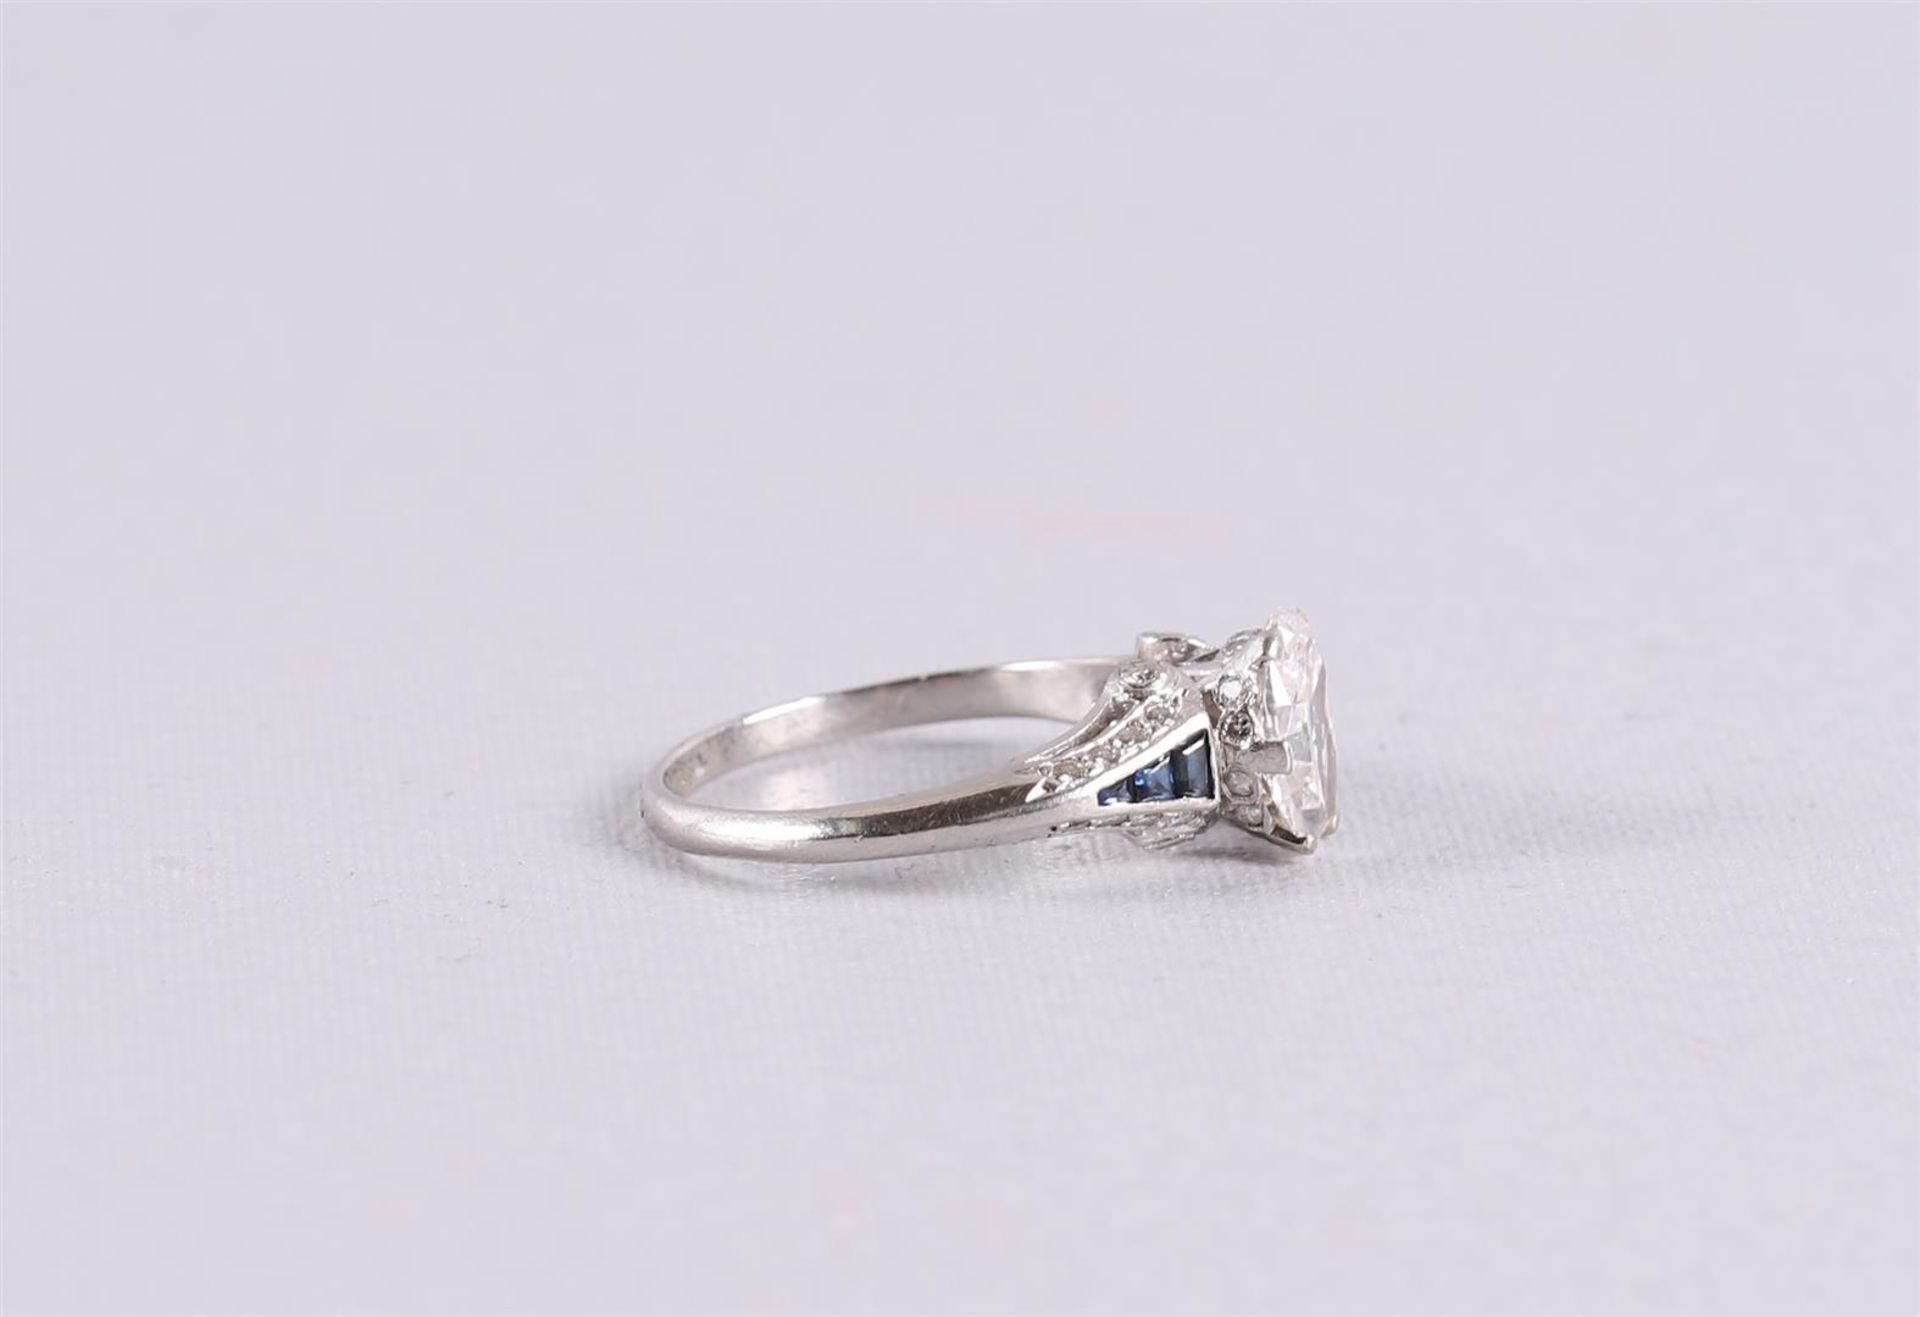 An 18 kt 750/1000 white gold women's ring, set with oval cut brilliants of approximately 1 ct, - Image 3 of 5